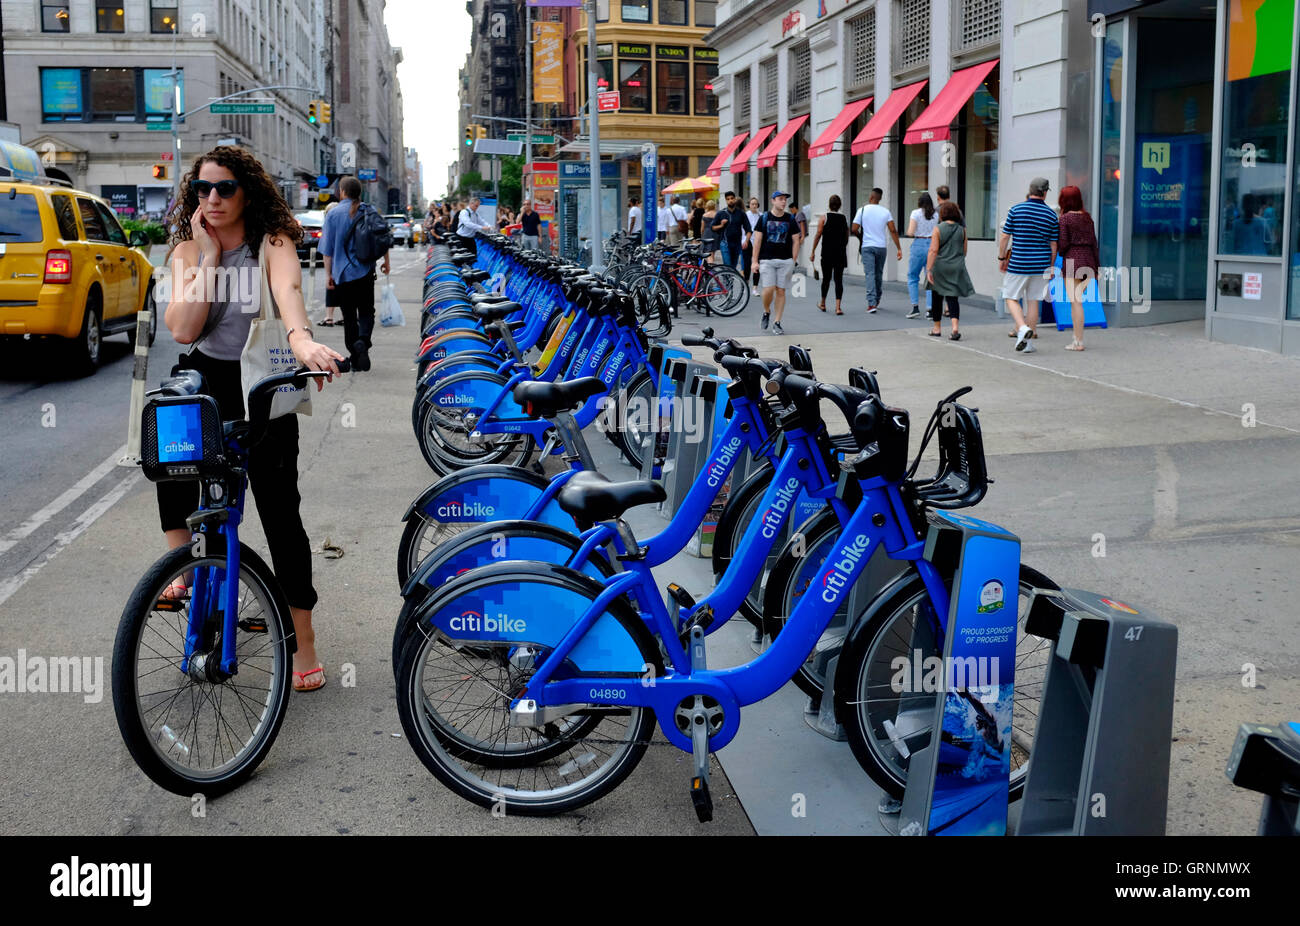 A female rider riding on a Citibike by a Citibike share station in Union Square.Manhattan.New York City,USA Stock Photo